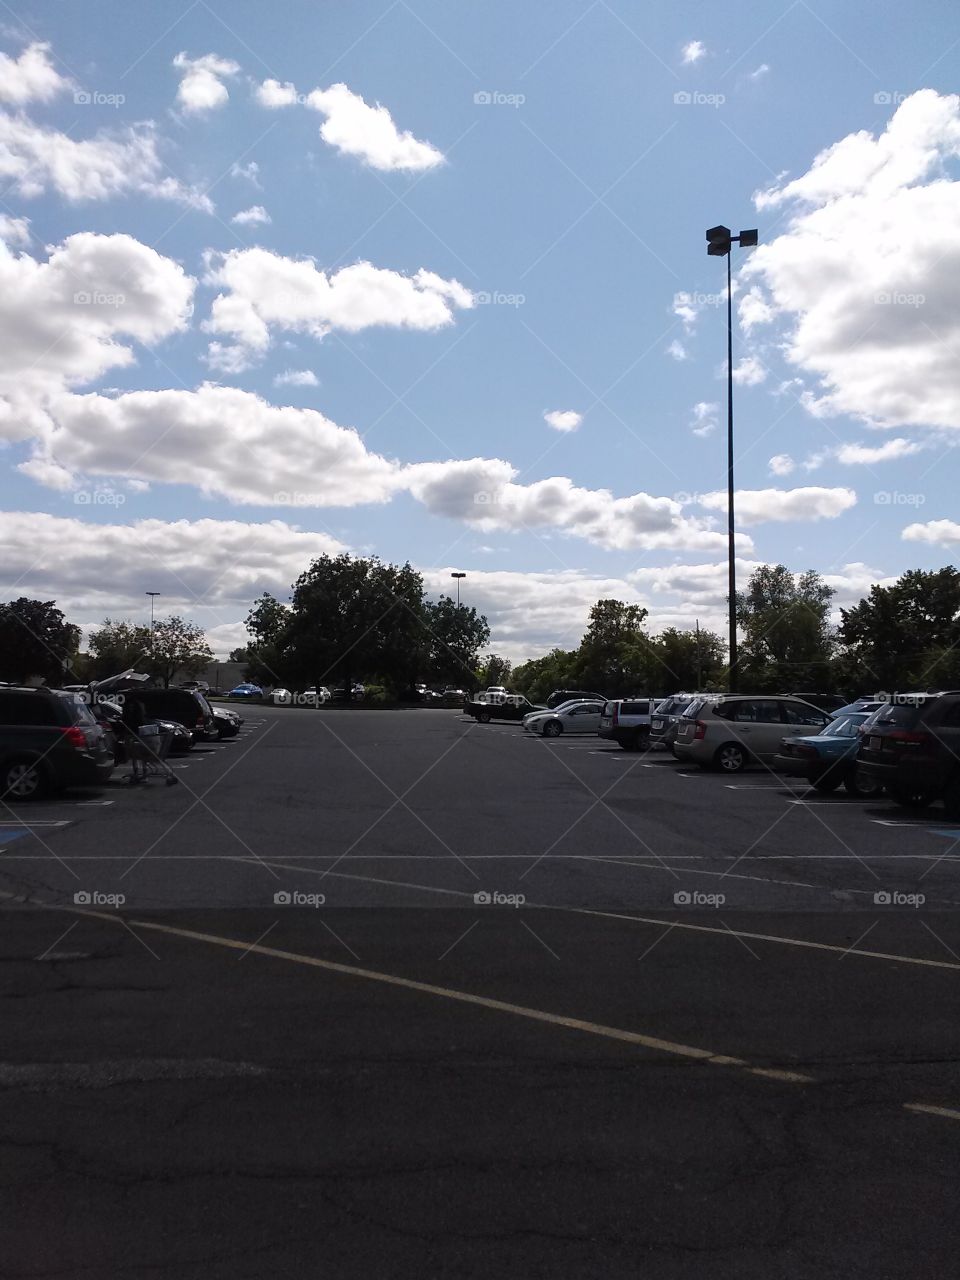 Fluffy Clouds over The Parking Lot